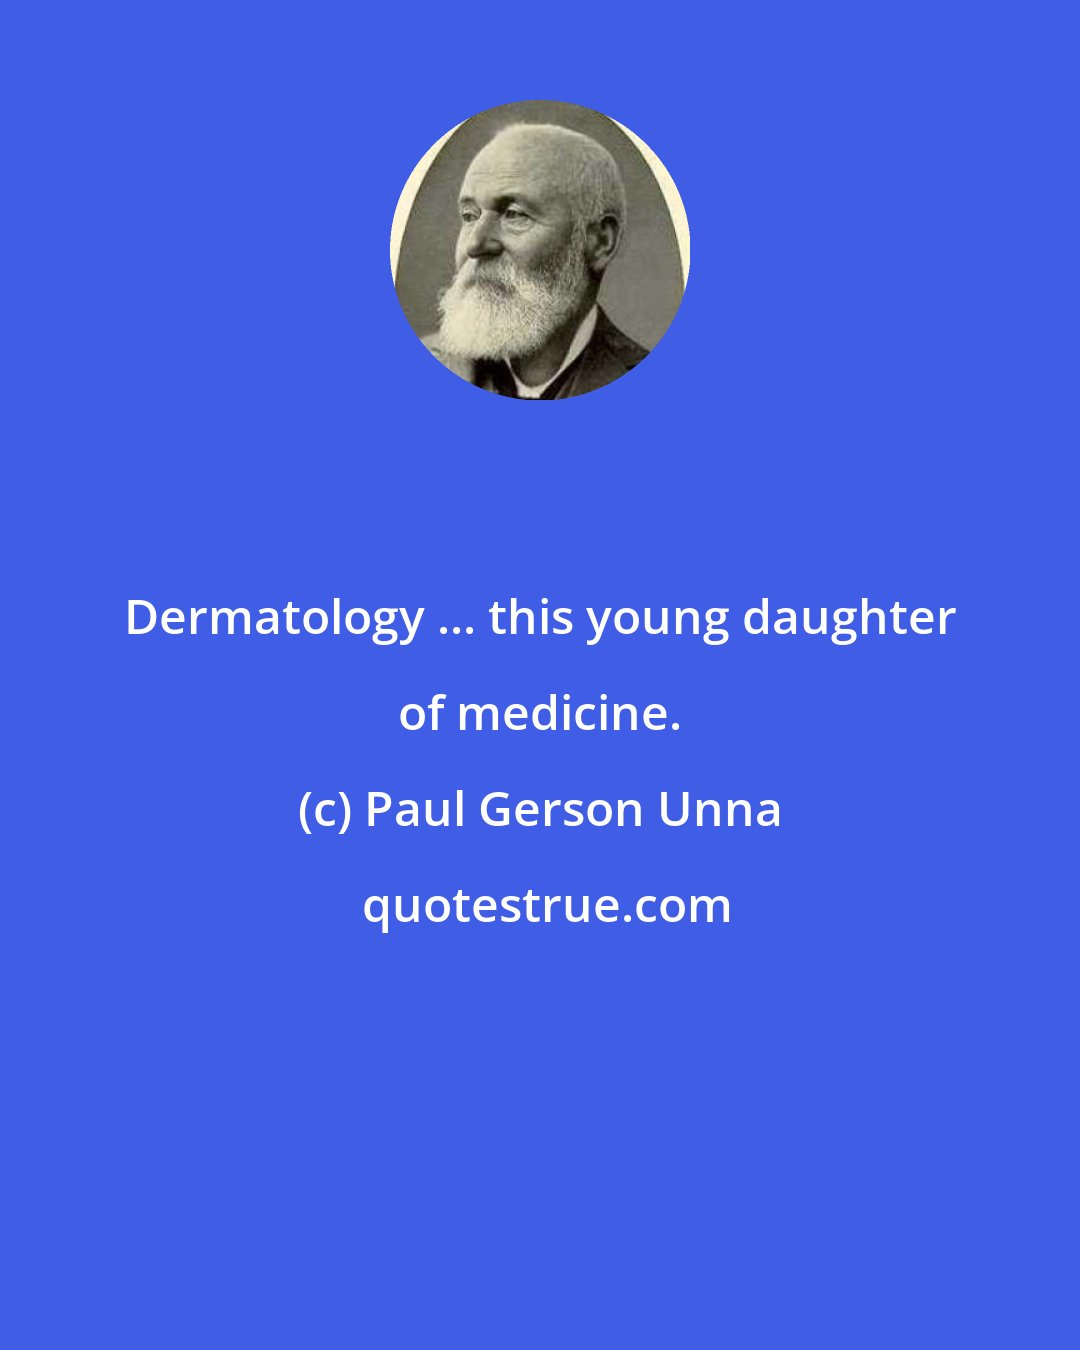 Paul Gerson Unna: Dermatology ... this young daughter of medicine.